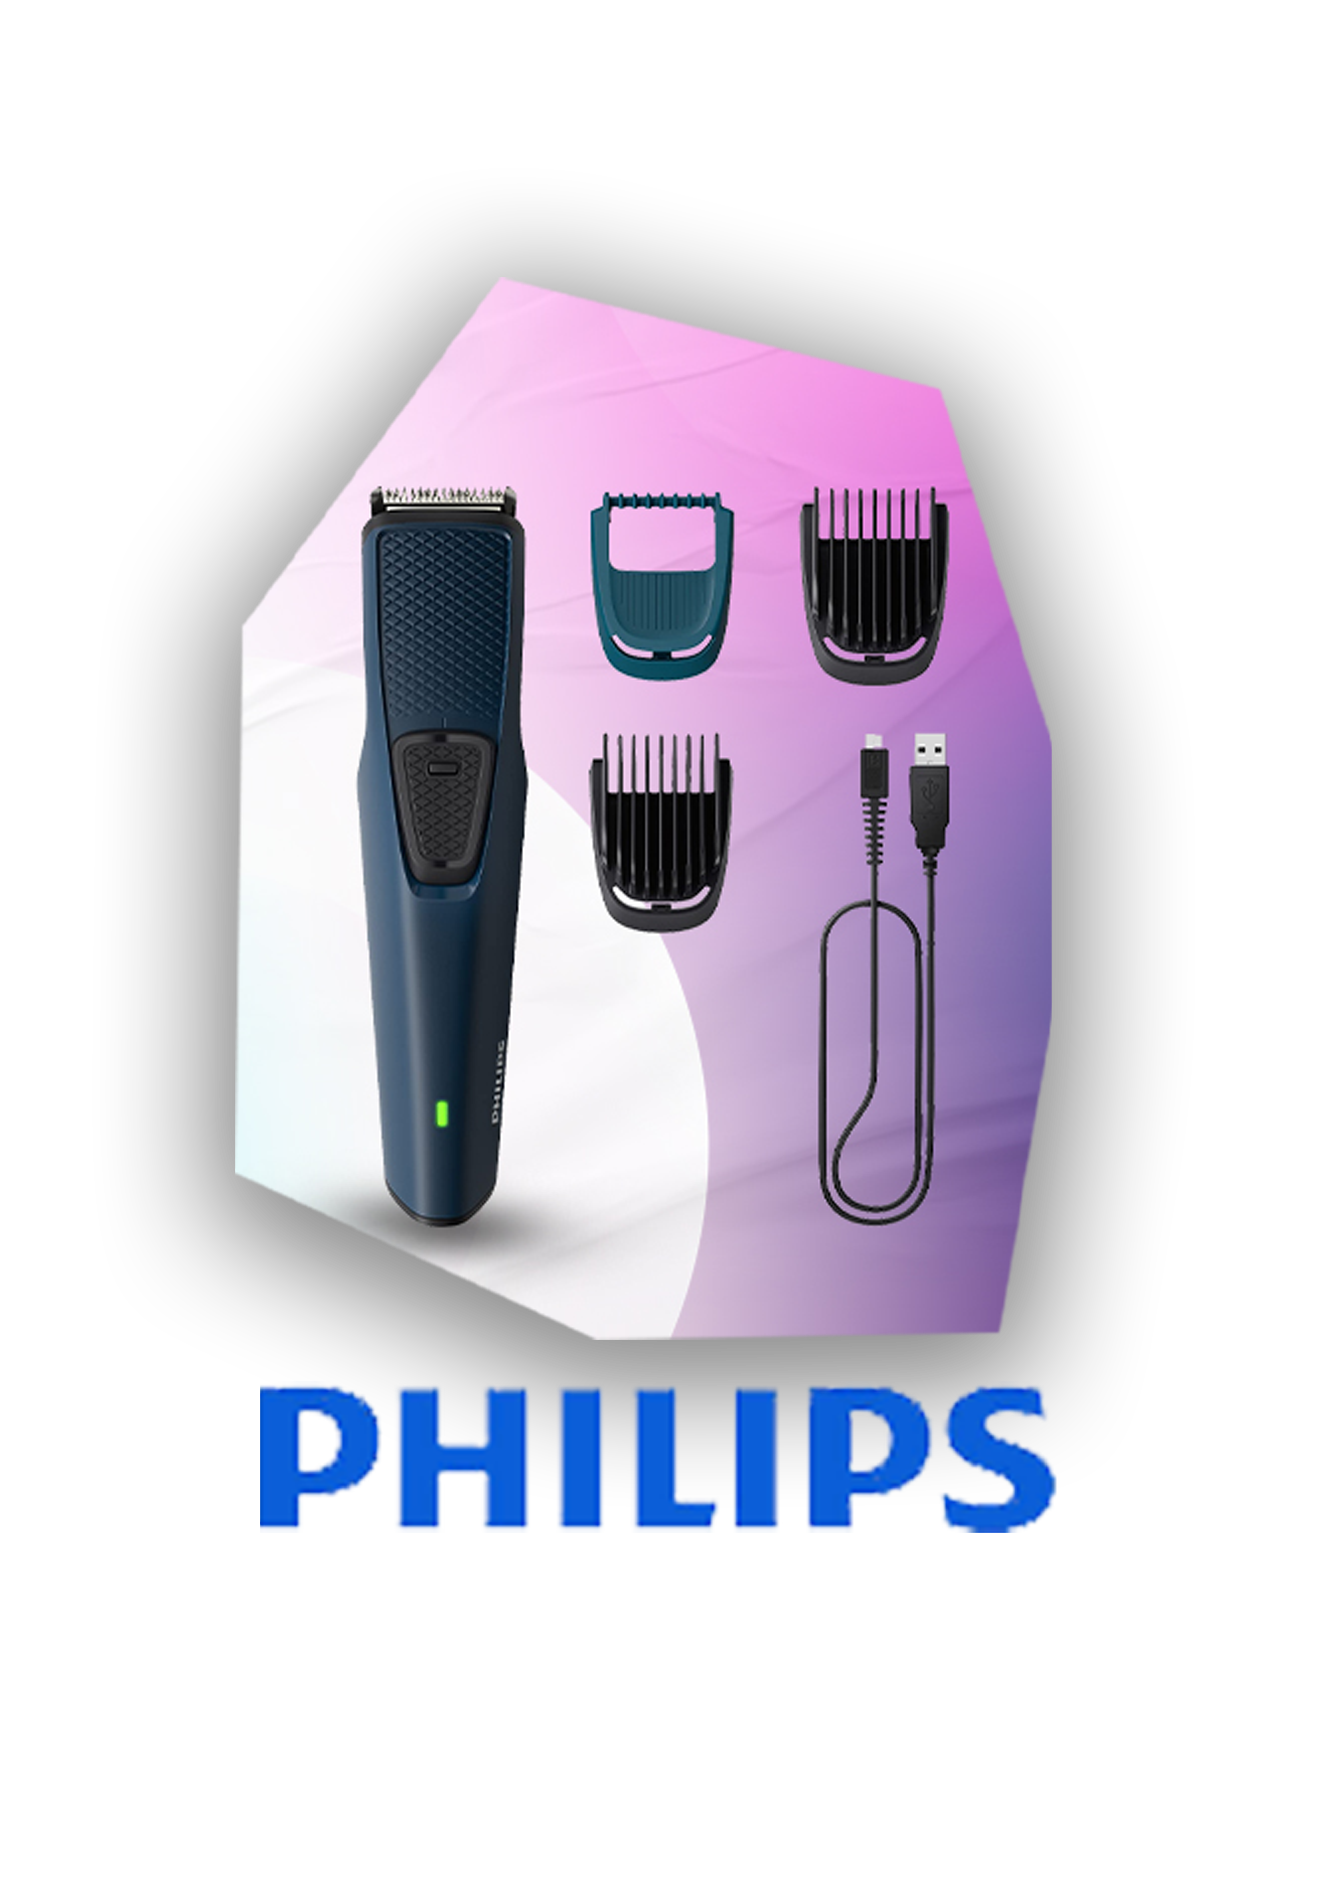 Win A Philips Skin Protect Beard Trimmer